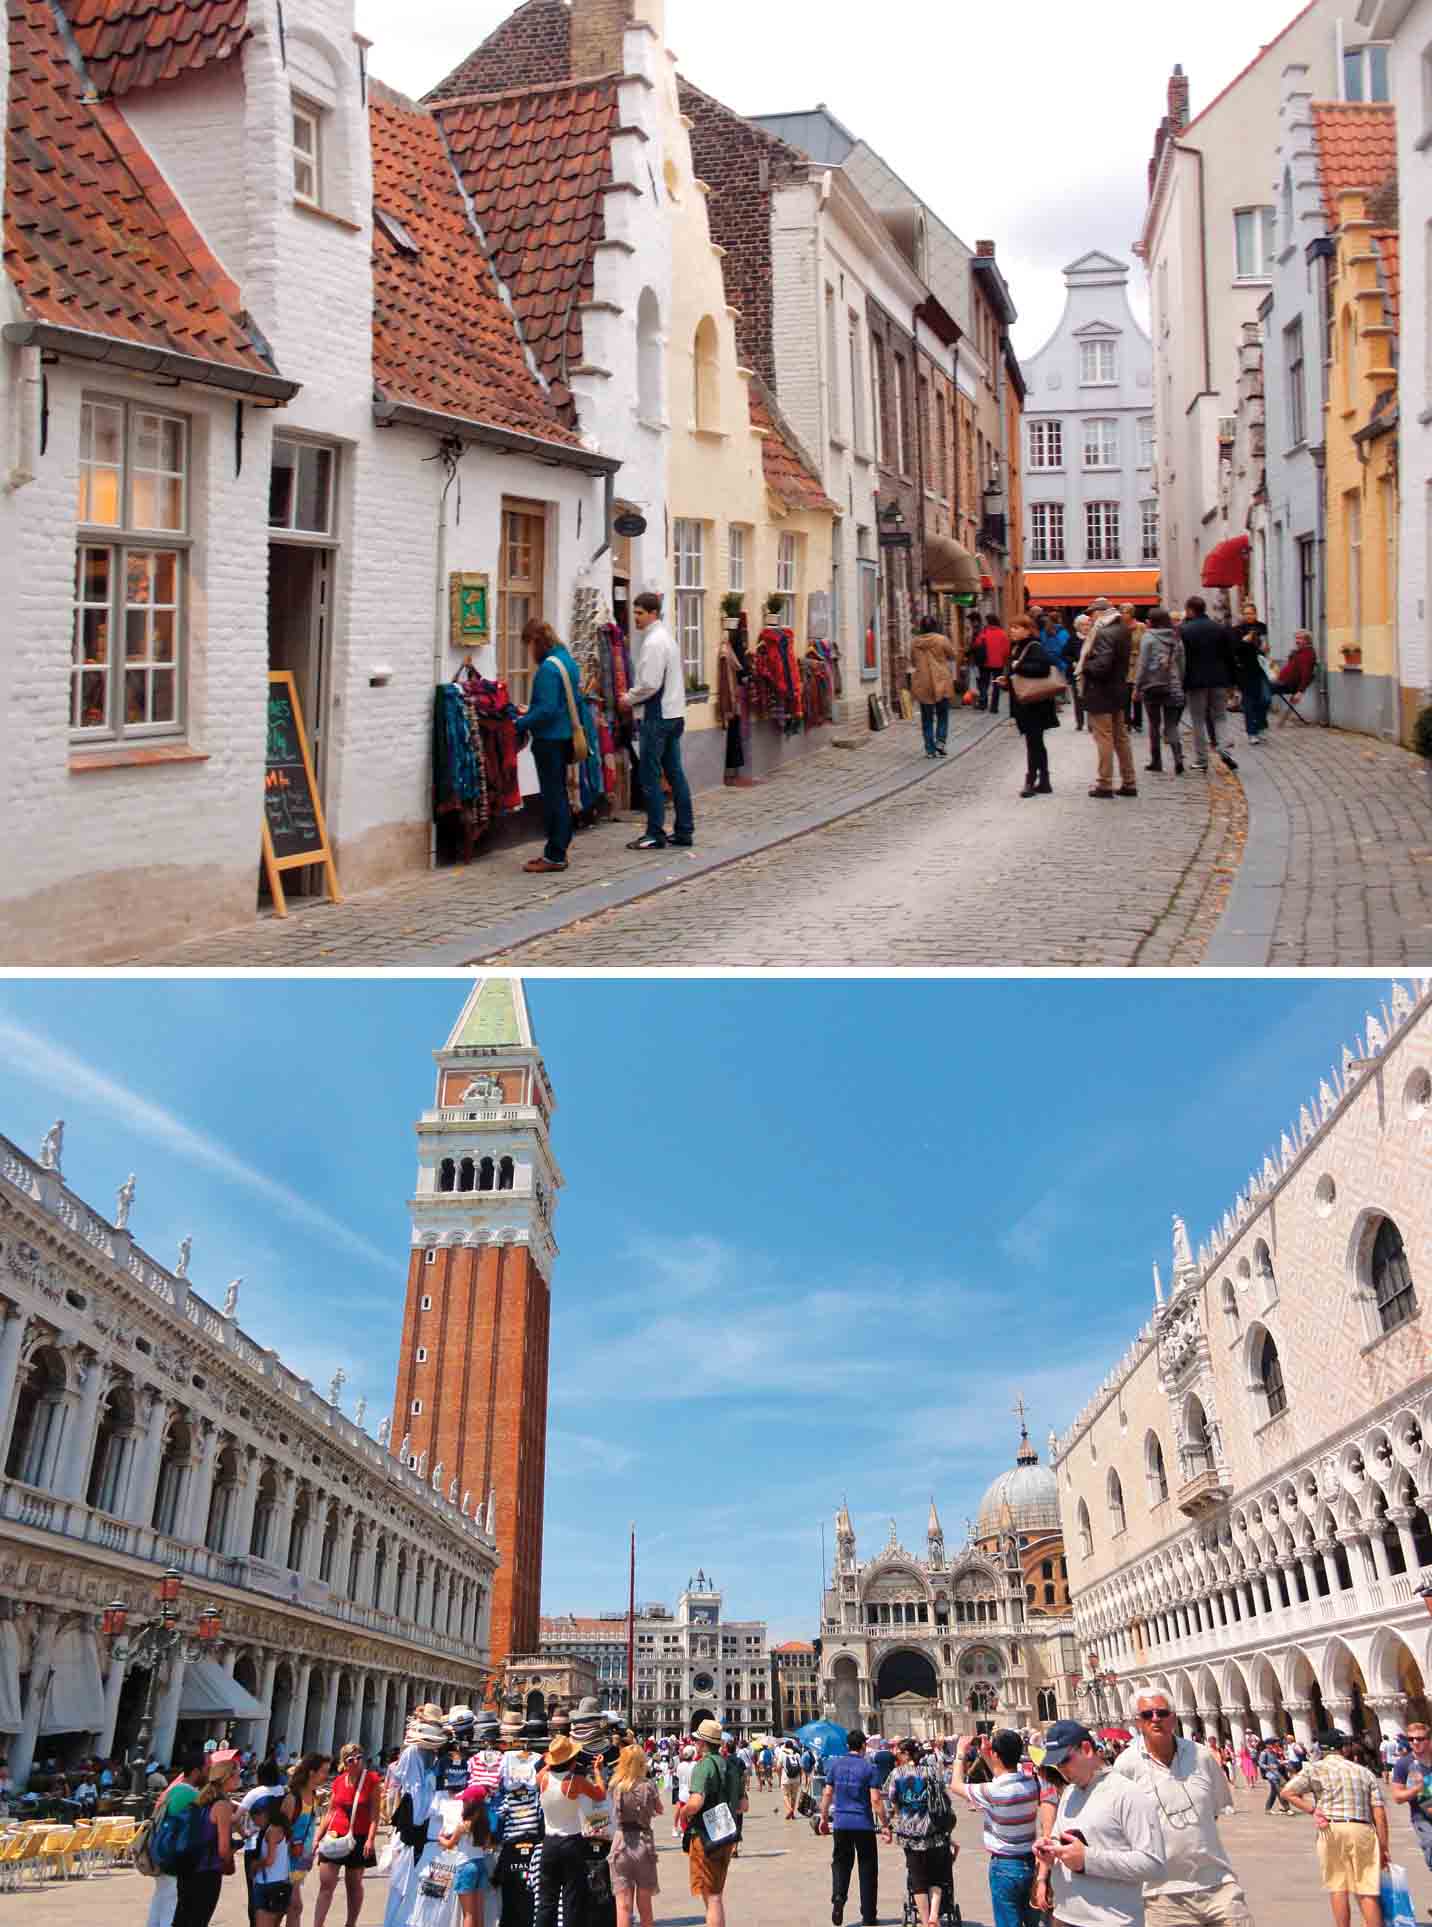 perspectives-on-space-walk-through-squares-corners-bruges-belgium-st-marks-venice